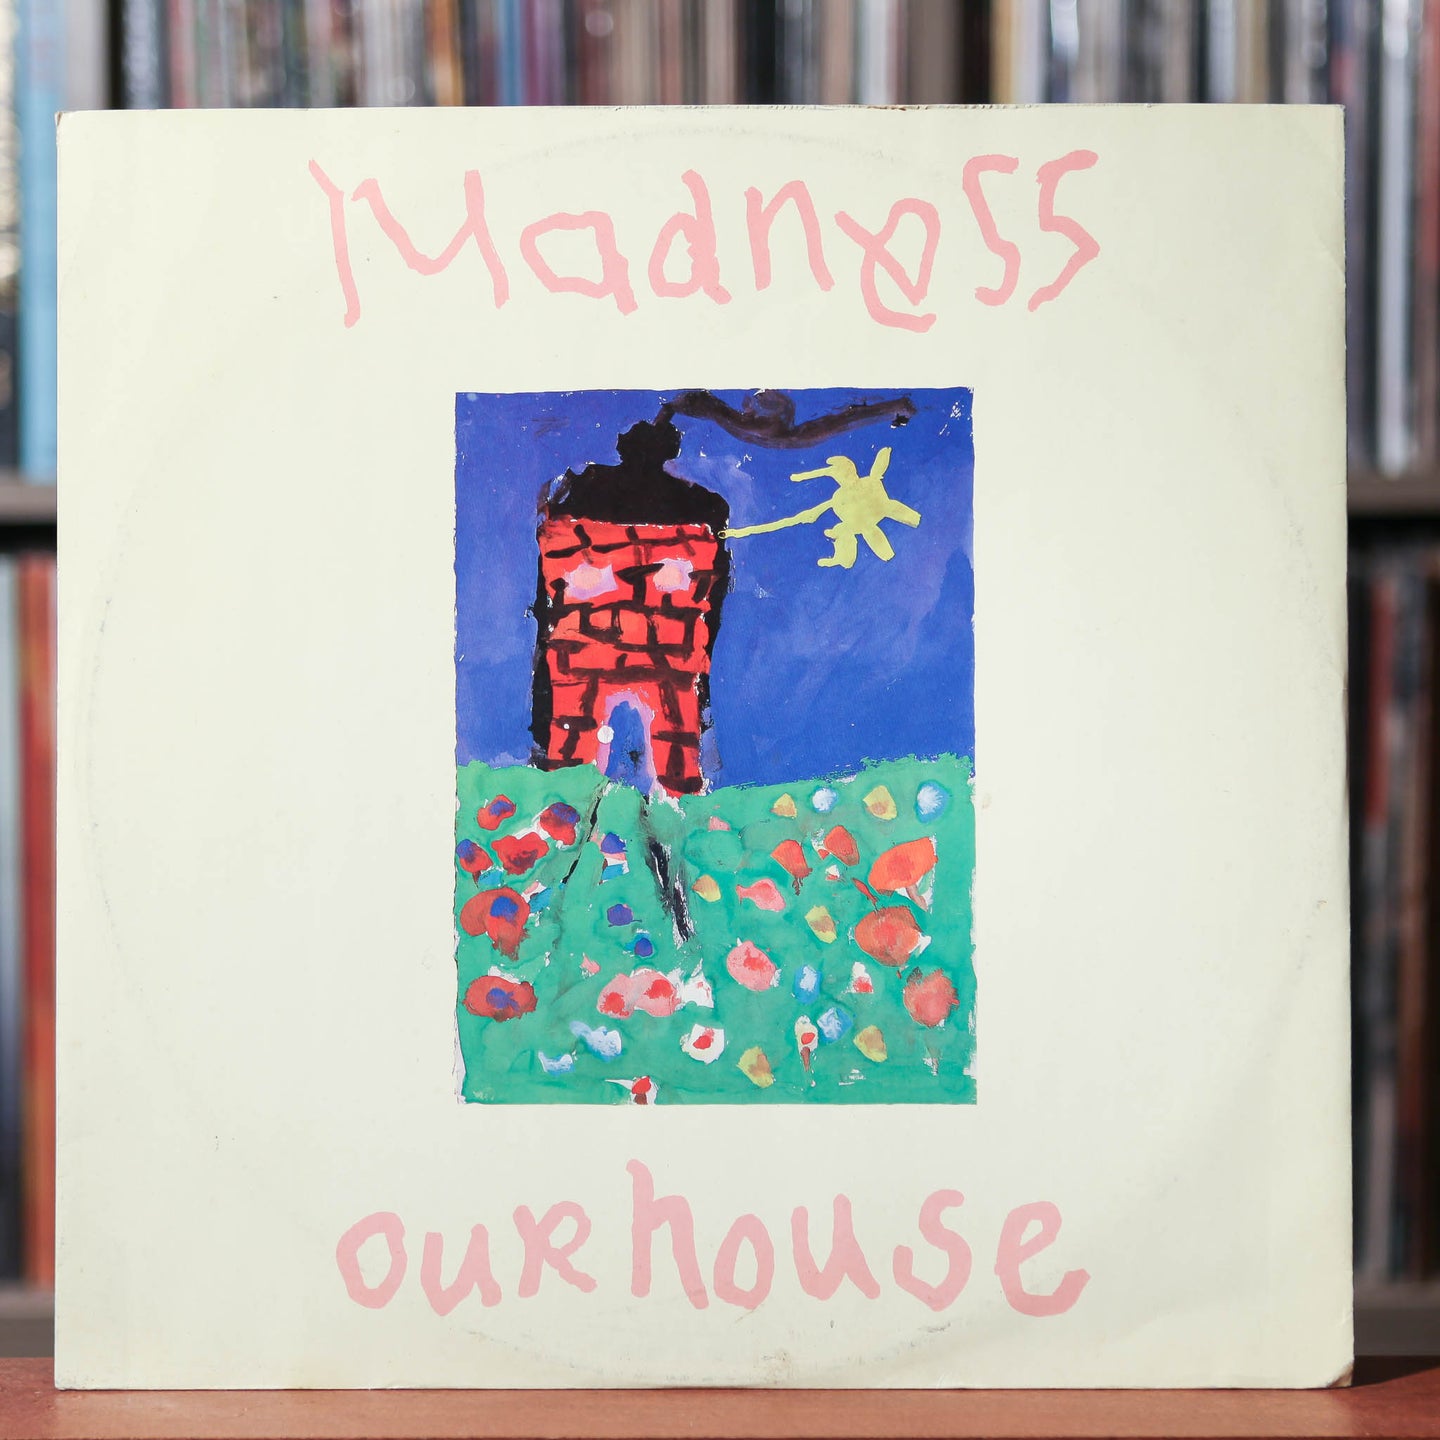 Madness - Our House - 12